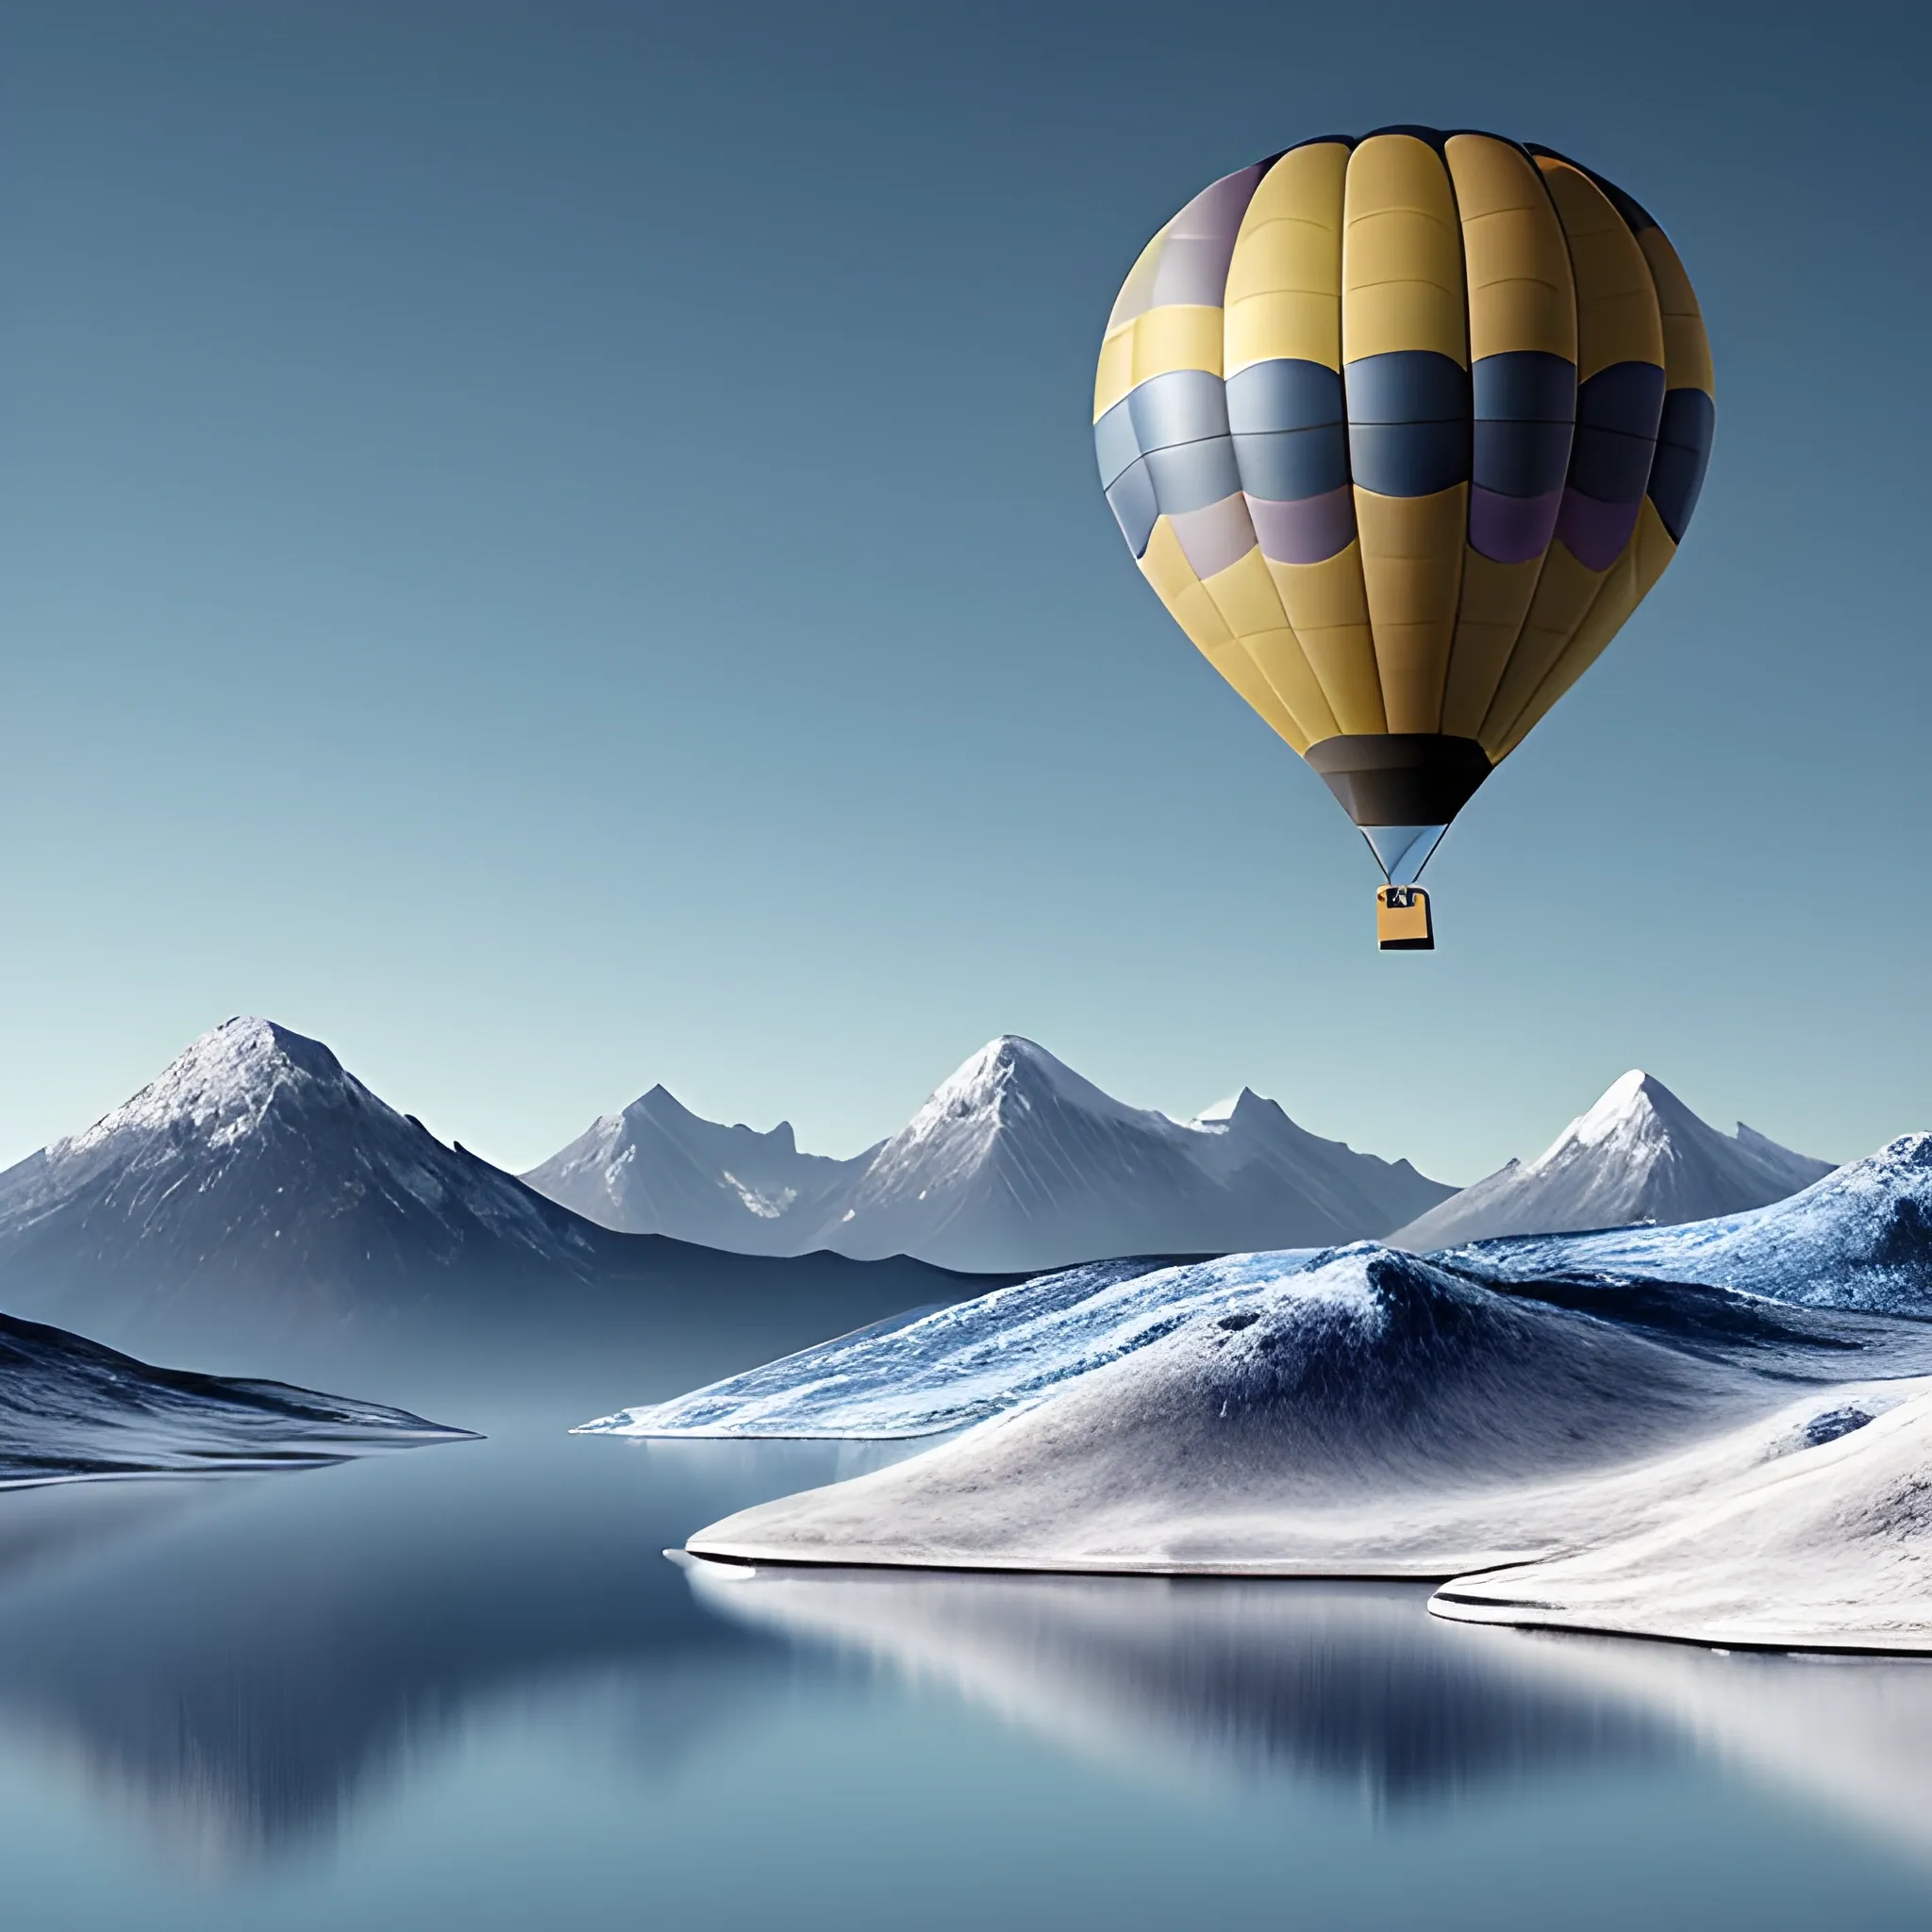 The image depicts a serene and peaceful landscape, featuring a hot air balloon floating in the sky above a range of snow-capped mountains. The mountains are depicted in a realistic style, with rugged and rocky textures and an array of blue and gray shades. In the foreground, there is a calm and still lake, reflecting the blue sky and the surrounding mountains. The focal point of the image is the hot air balloon, which is a vibrant shade of blue (#0EA9D4) and has the word "Lornet" clearly visible in white letters on the side. The use of this particular shade of blue adds a sense of brightness and energy to the image, contrasting with the cooler blue and gray tones of the mountains and lake. The overall color palette of the image is dominated by shades of blue and light tones, creating a sense of calm and tranquility., 3D